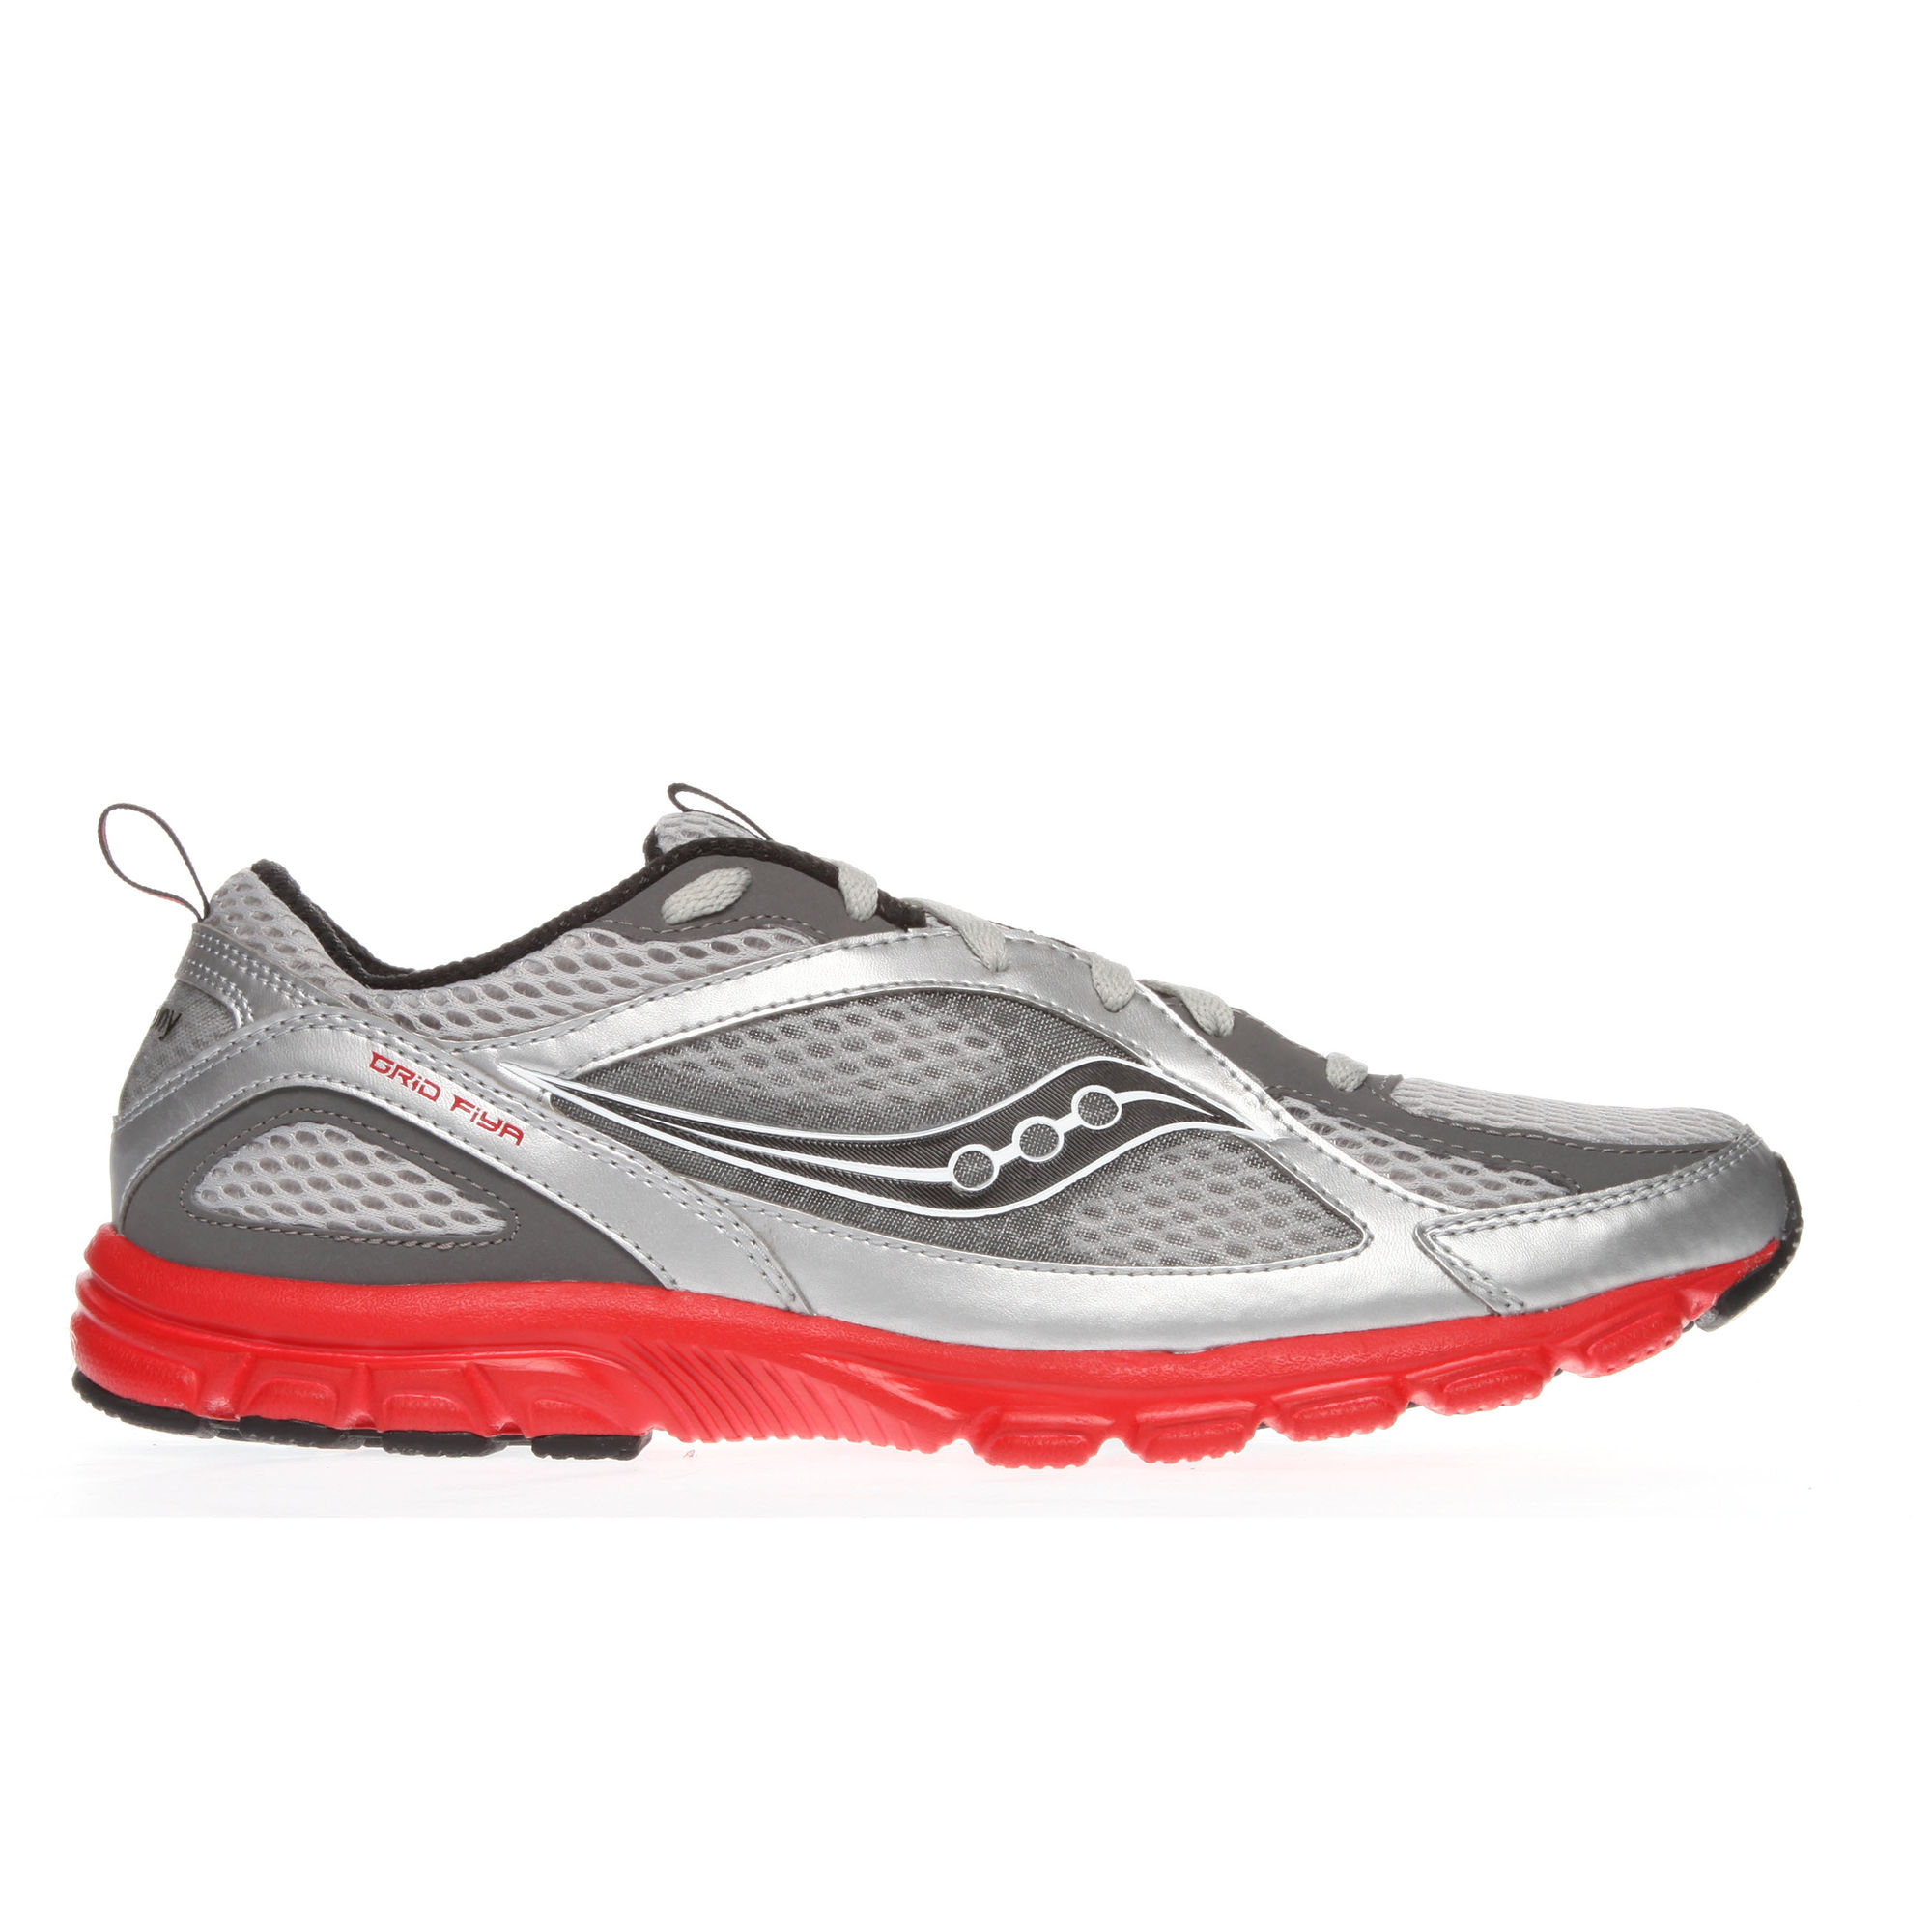 Saucony Grid Tuned trail running shoes 